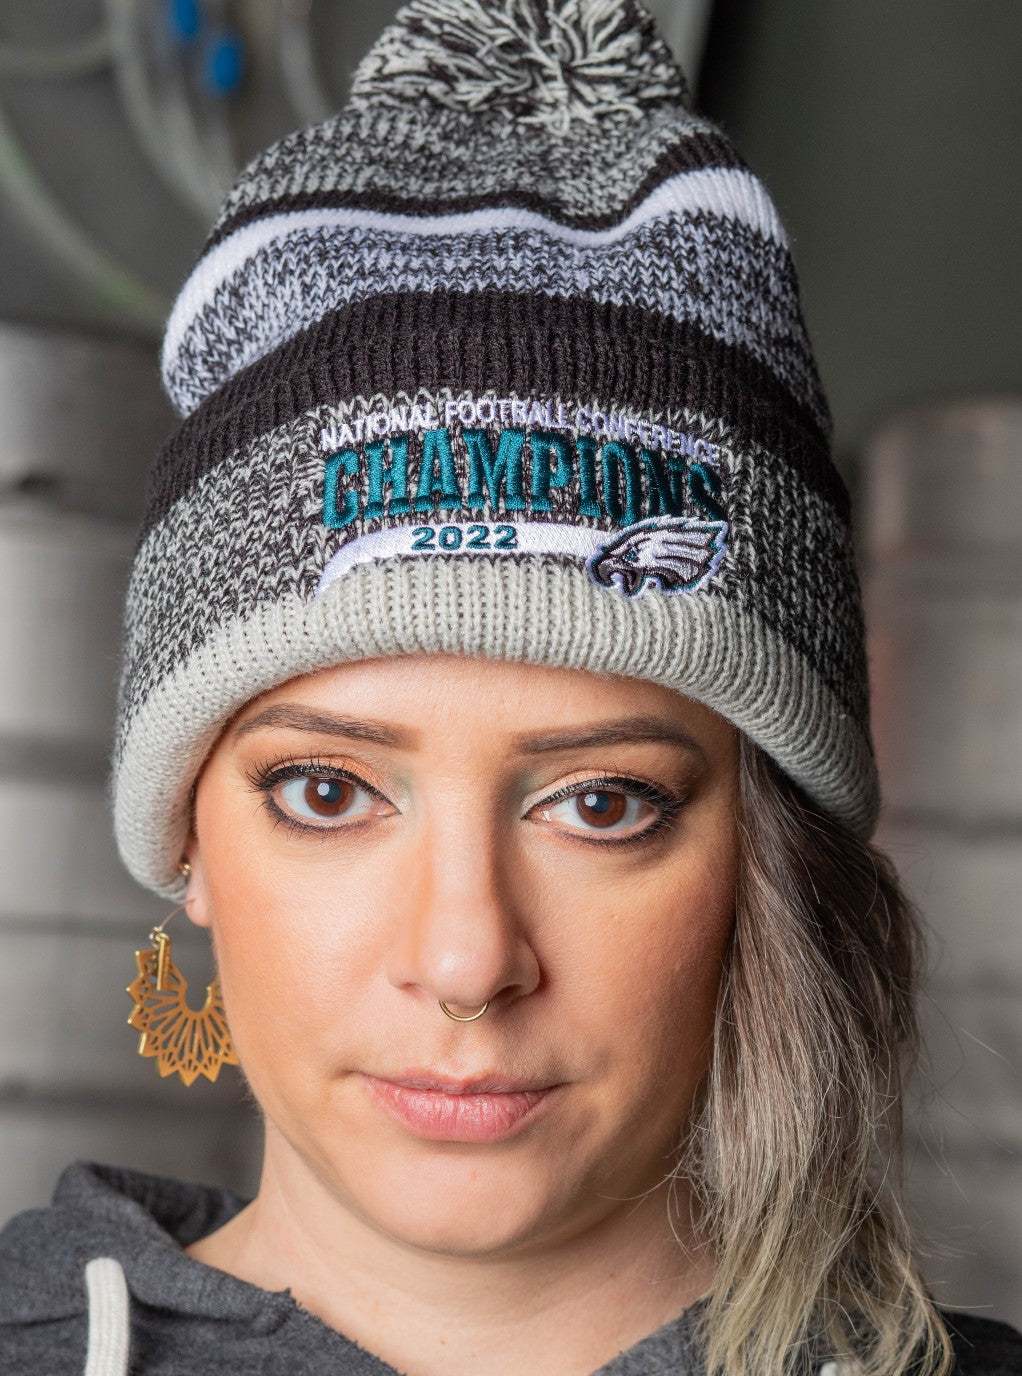 Philadelphia Eagles '87 Hoodie | Kelly Green Eagles Apparel from Homage. | Officially Licensed NFL Apparel from Homage Pro Shop.